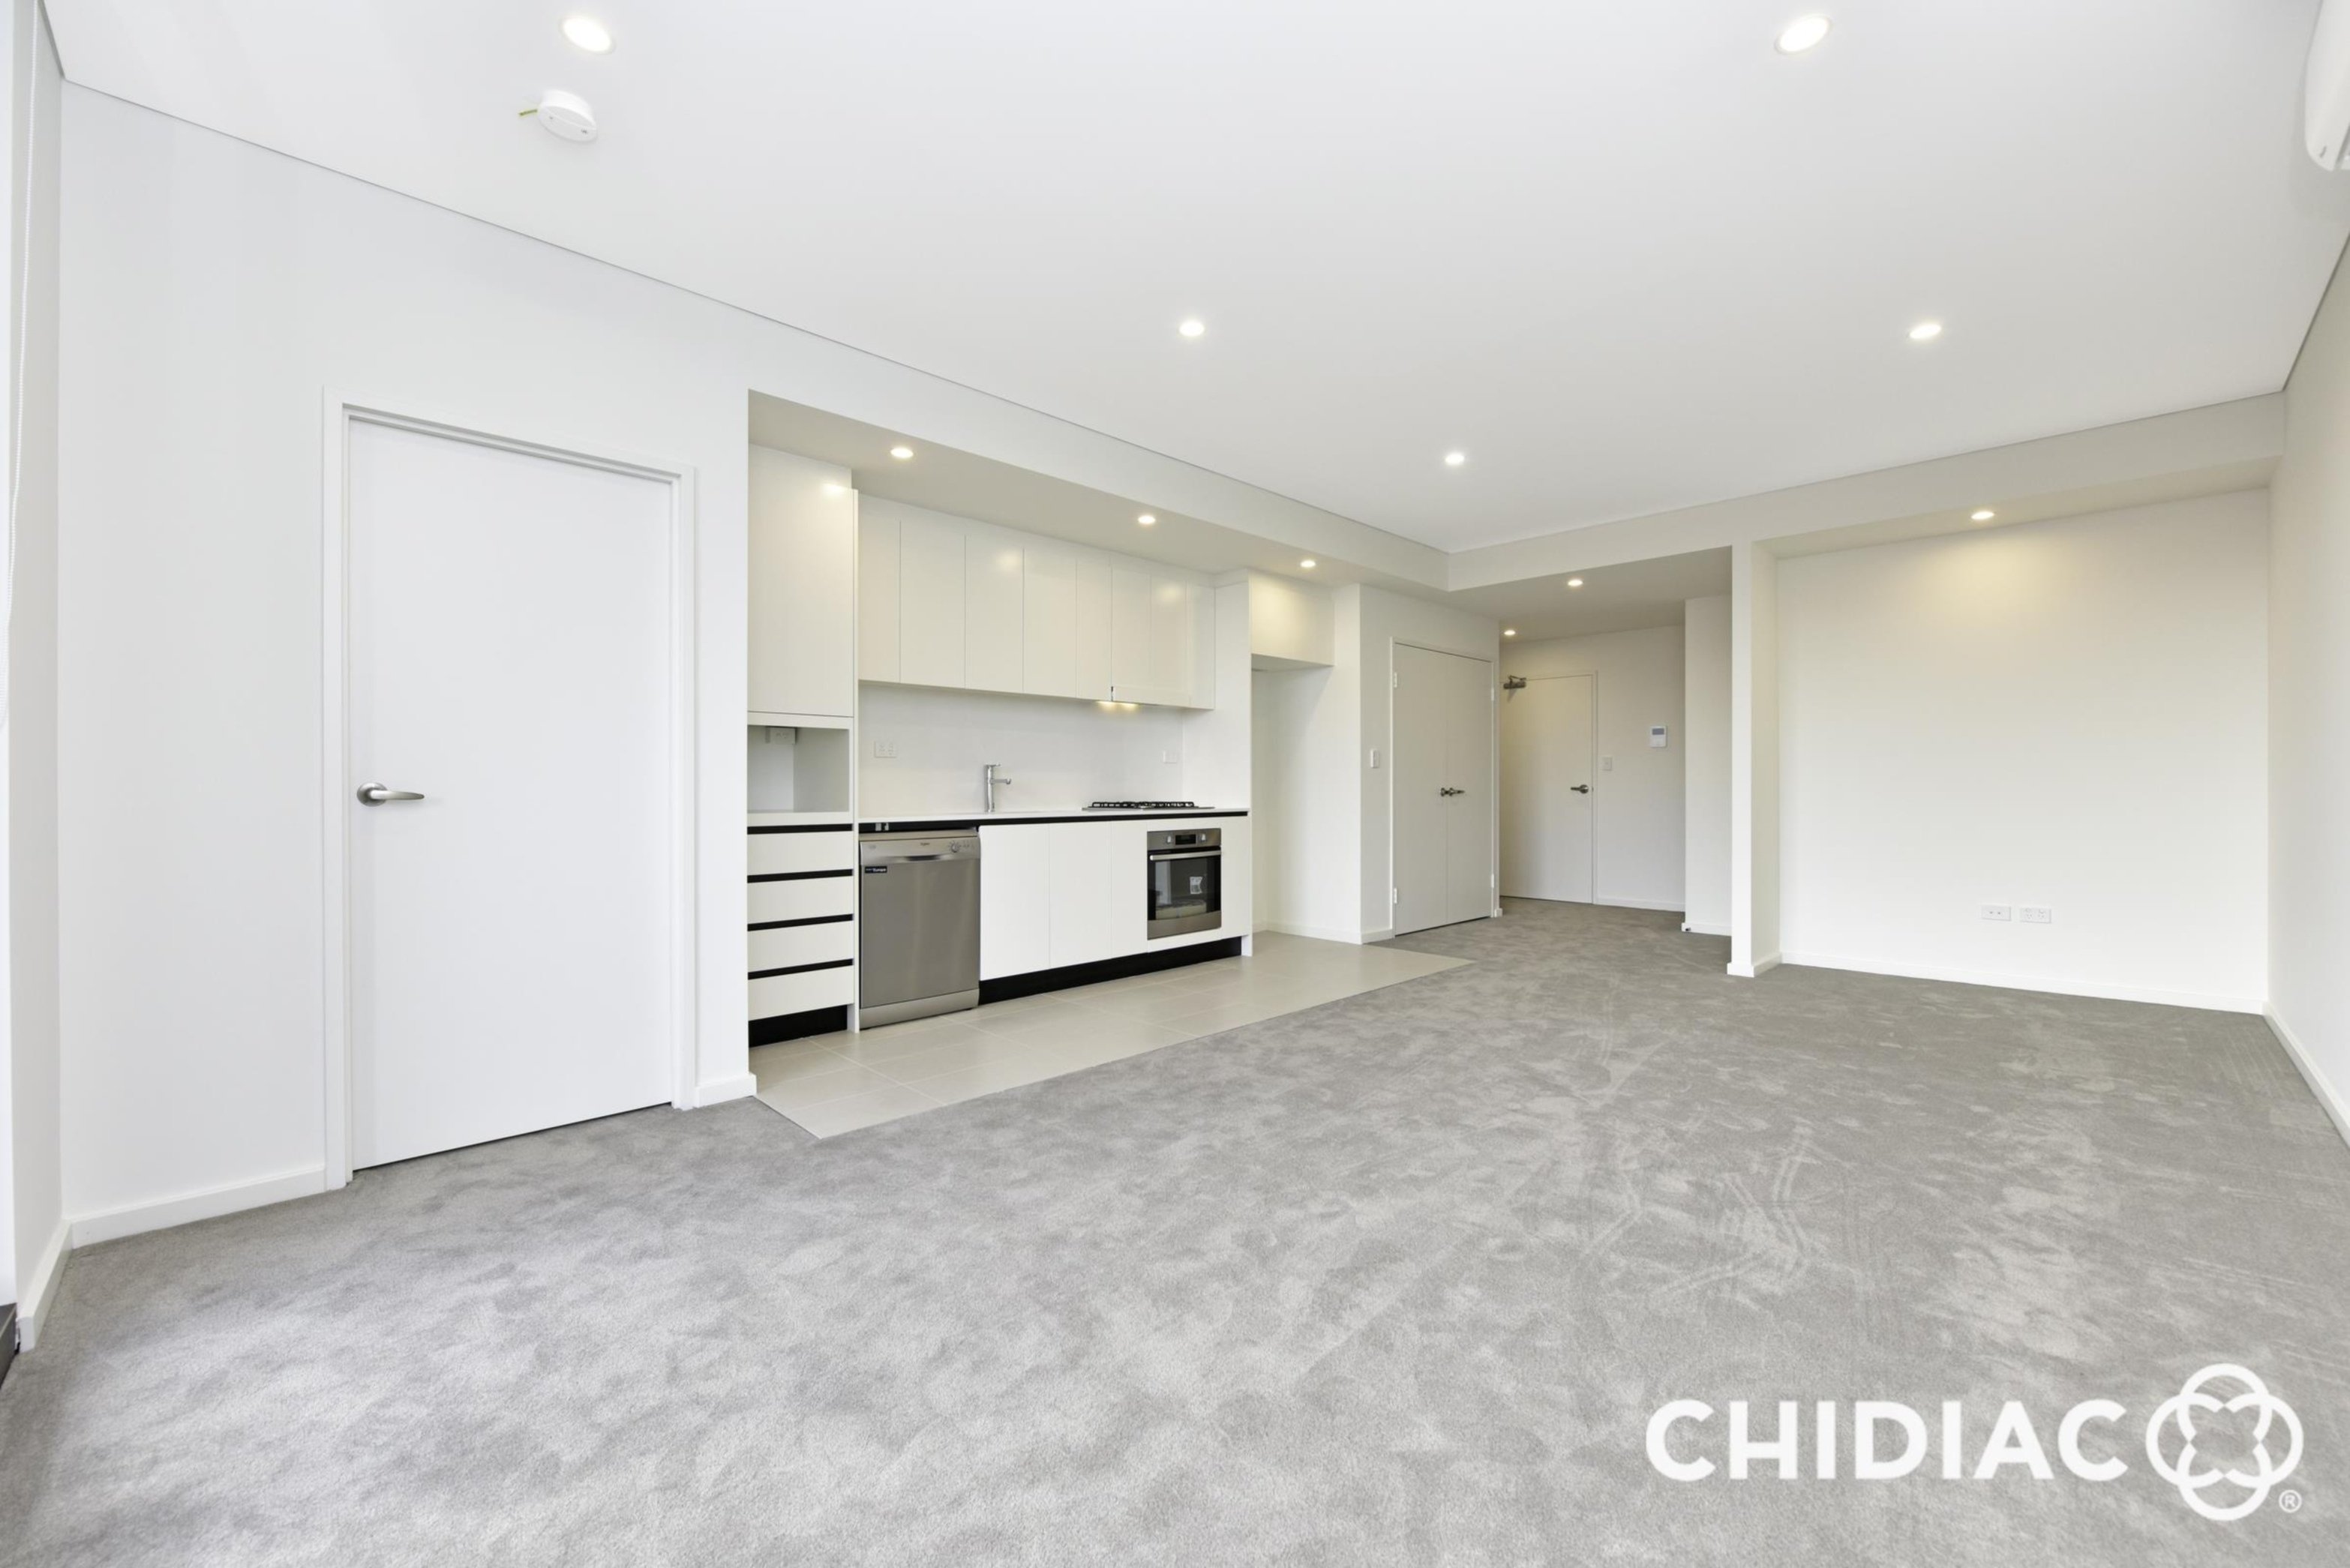 15/337 Beamish Street, Campsie Leased by Chidiac Realty - image 1